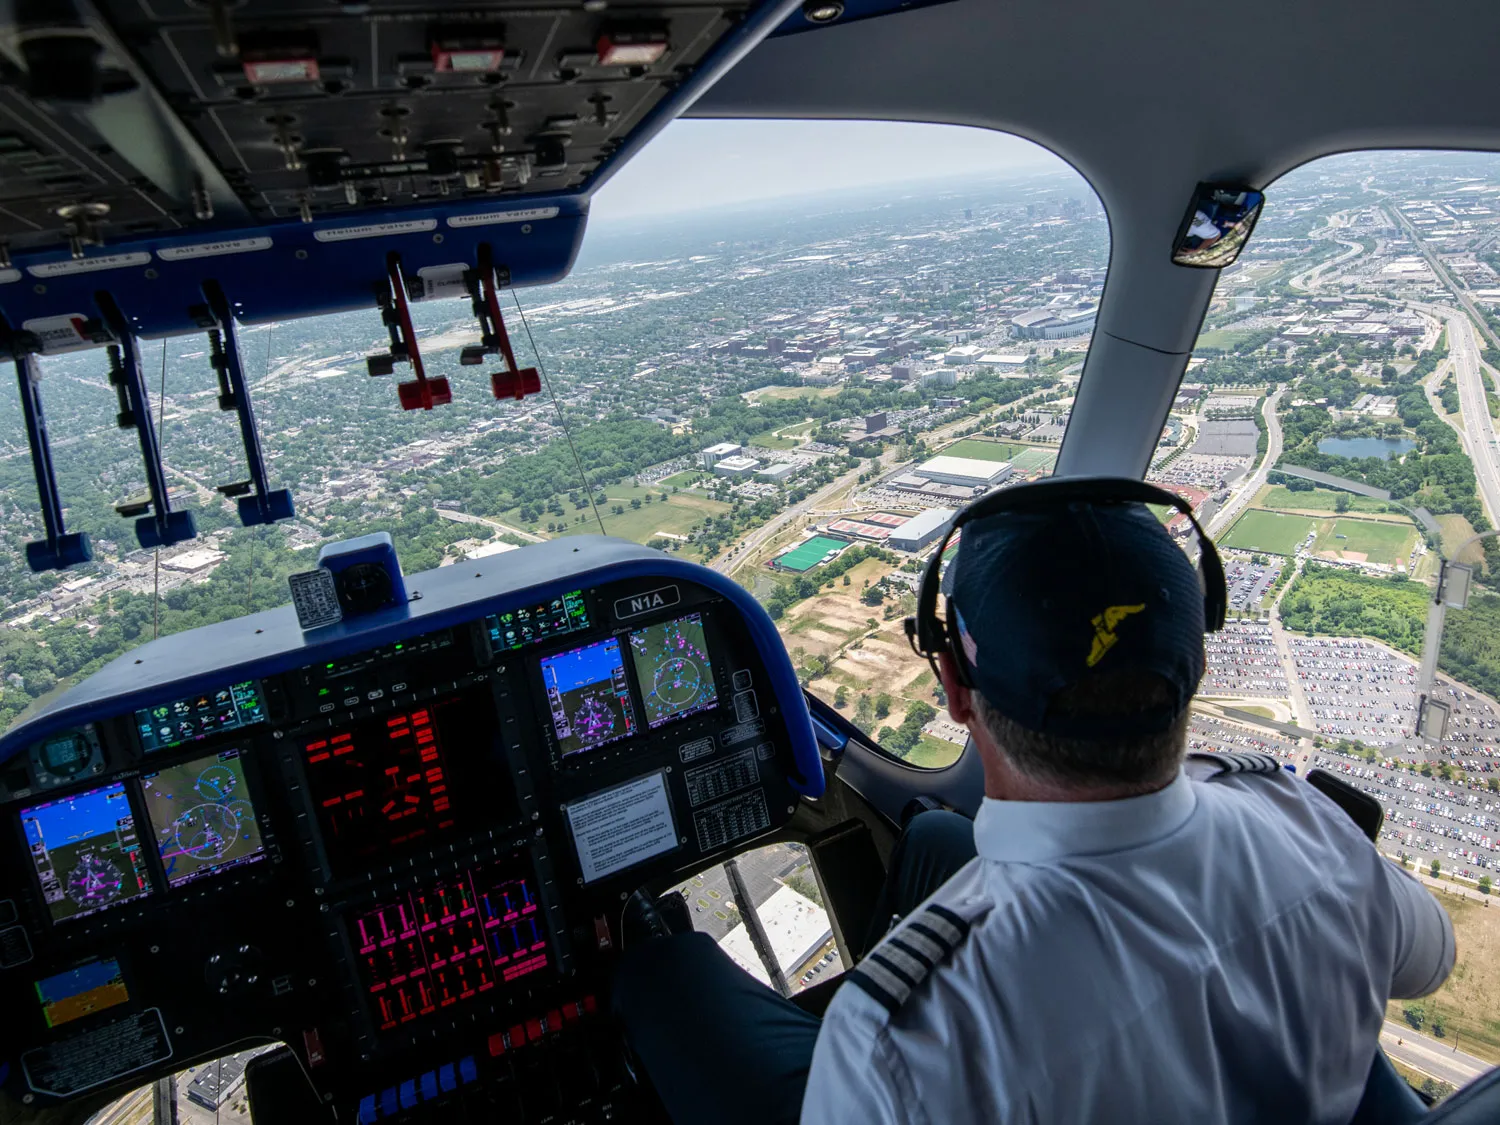 Pilot Joe Erbs looks out the cockpit window over the ground far below, where a highway, parking lots, buildings and fields can be seen.  